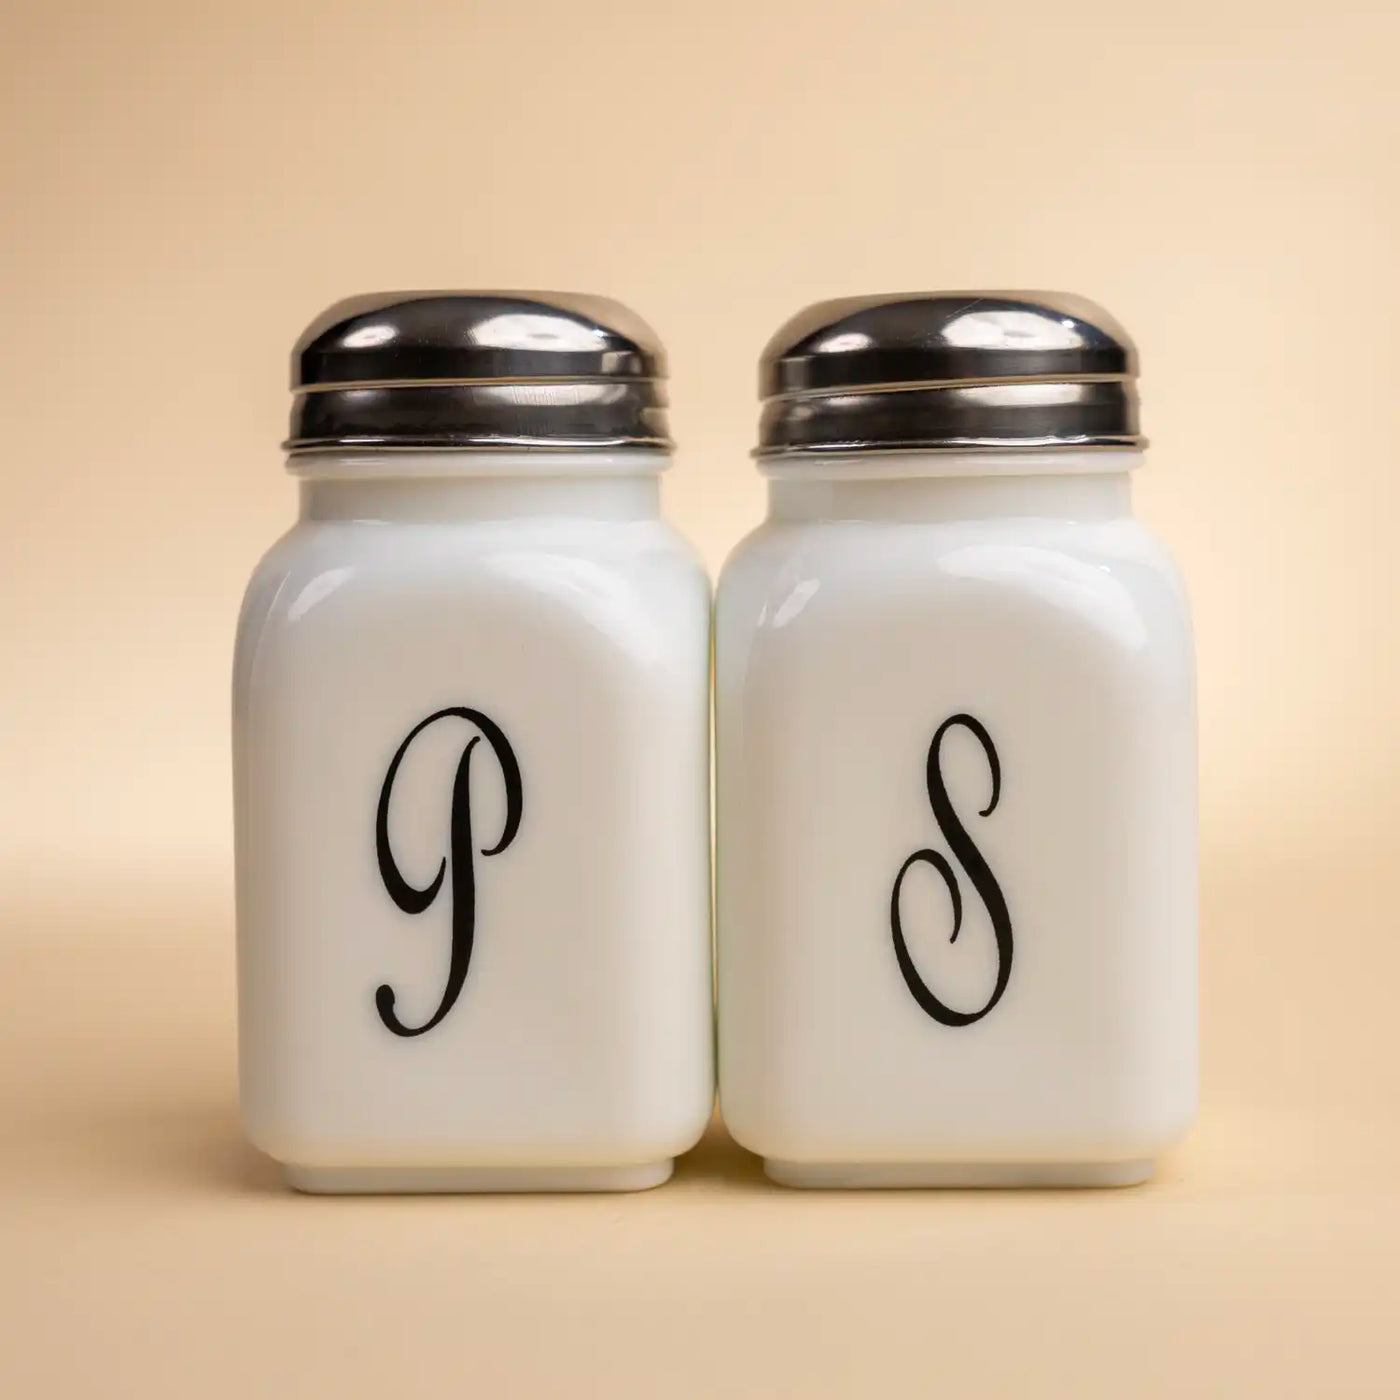 Milk Glass Vintage Salt and Pepper Shakers with Monogram